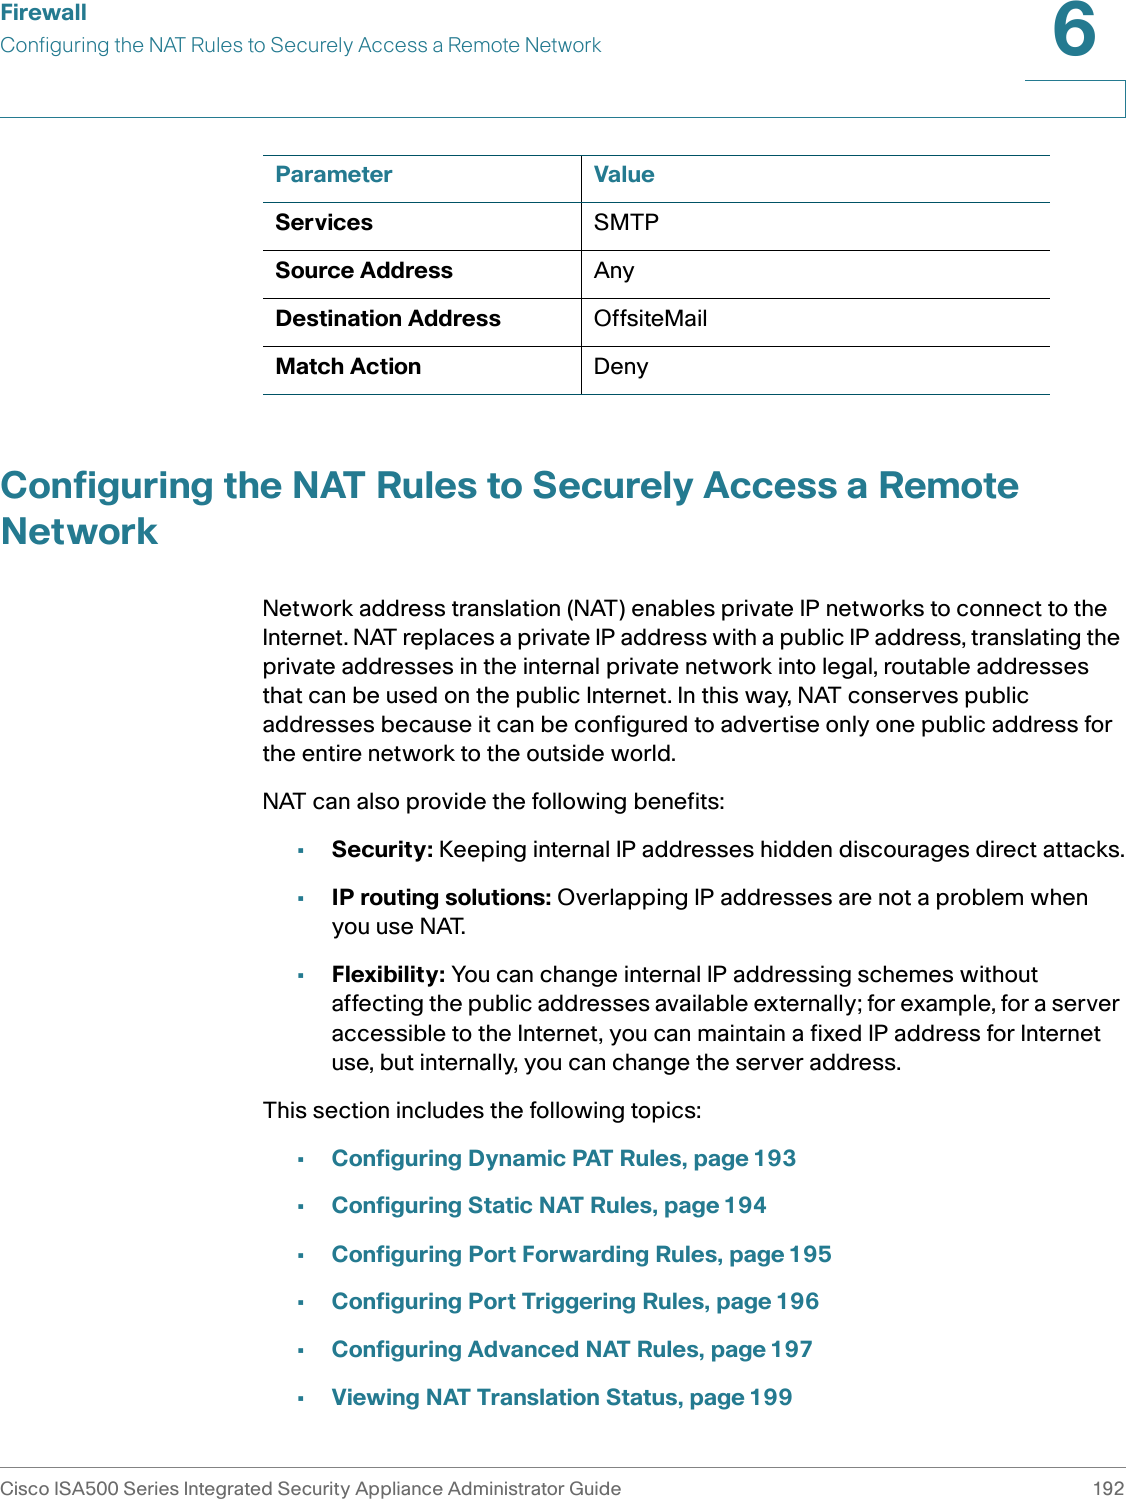 FirewallConfiguring the NAT Rules to Securely Access a Remote NetworkCisco ISA500 Series Integrated Security Appliance Administrator Guide 1926 Configuring the NAT Rules to Securely Access a Remote NetworkNetwork address translation (NAT) enables private IP networks to connect to the Internet. NAT replaces a private IP address with a public IP address, translating the private addresses in the internal private network into legal, routable addresses that can be used on the public Internet. In this way, NAT conserves public addresses because it can be configured to advertise only one public address for the entire network to the outside world.NAT can also provide the following benefits:•Security: Keeping internal IP addresses hidden discourages direct attacks.•IP routing solutions: Overlapping IP addresses are not a problem when you use NAT.•Flexibility: You can change internal IP addressing schemes without affecting the public addresses available externally; for example, for a server accessible to the Internet, you can maintain a fixed IP address for Internet use, but internally, you can change the server address. This section includes the following topics:•Configuring Dynamic PAT Rules, page 193•Configuring Static NAT Rules, page 194•Configuring Port Forwarding Rules, page 195•Configuring Port Triggering Rules, page 196•Configuring Advanced NAT Rules, page 197•Viewing NAT Translation Status, page 199Services SMTPSource Address AnyDestination Address OffsiteMailMatch Action DenyParameter Value